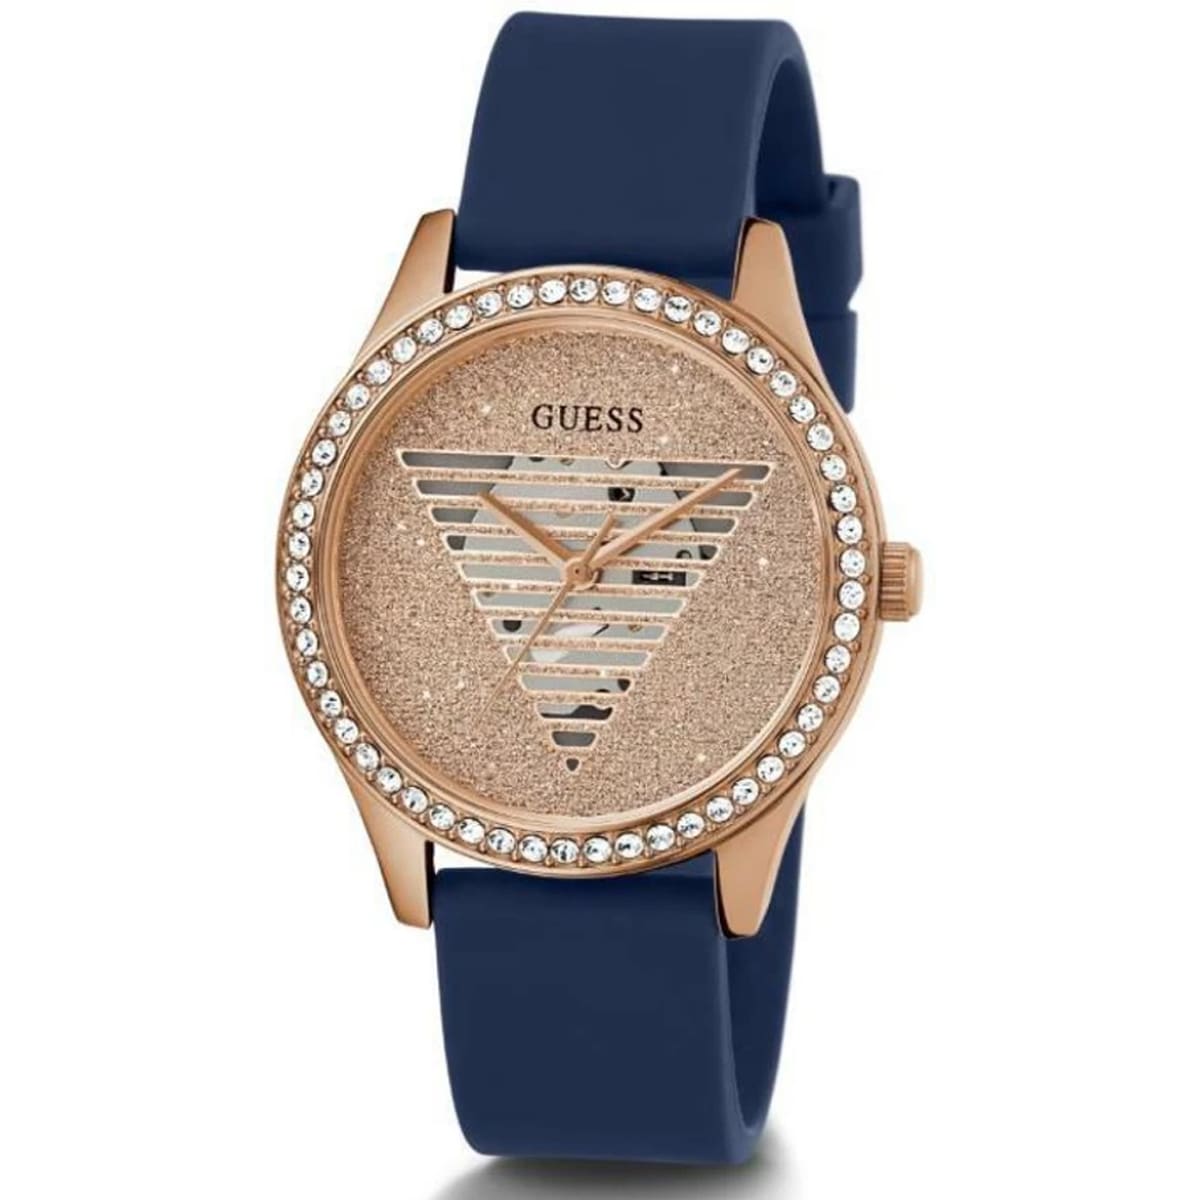 MONTRE GUESS LADY IDOL FEMME SILICONE